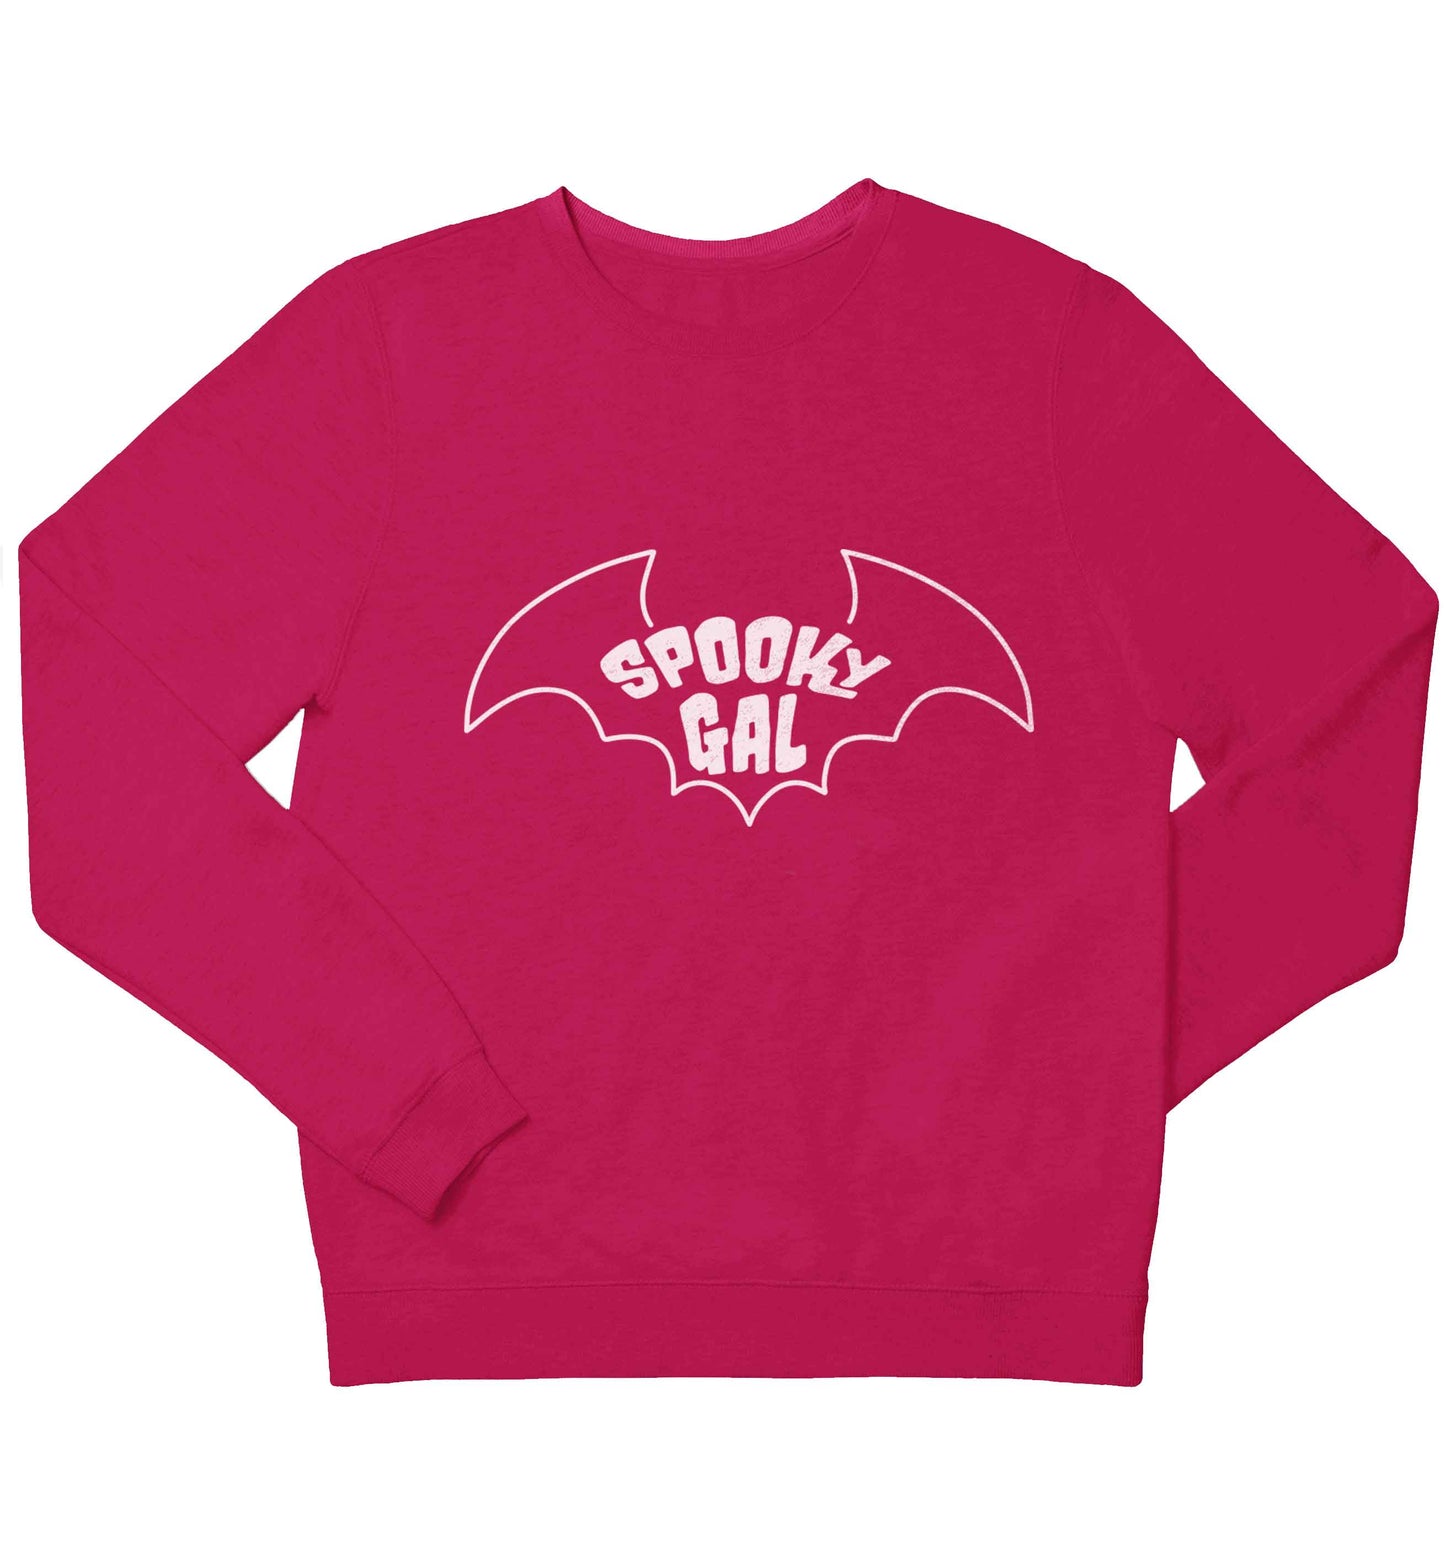 Spooky gal Kit children's pink sweater 12-13 Years